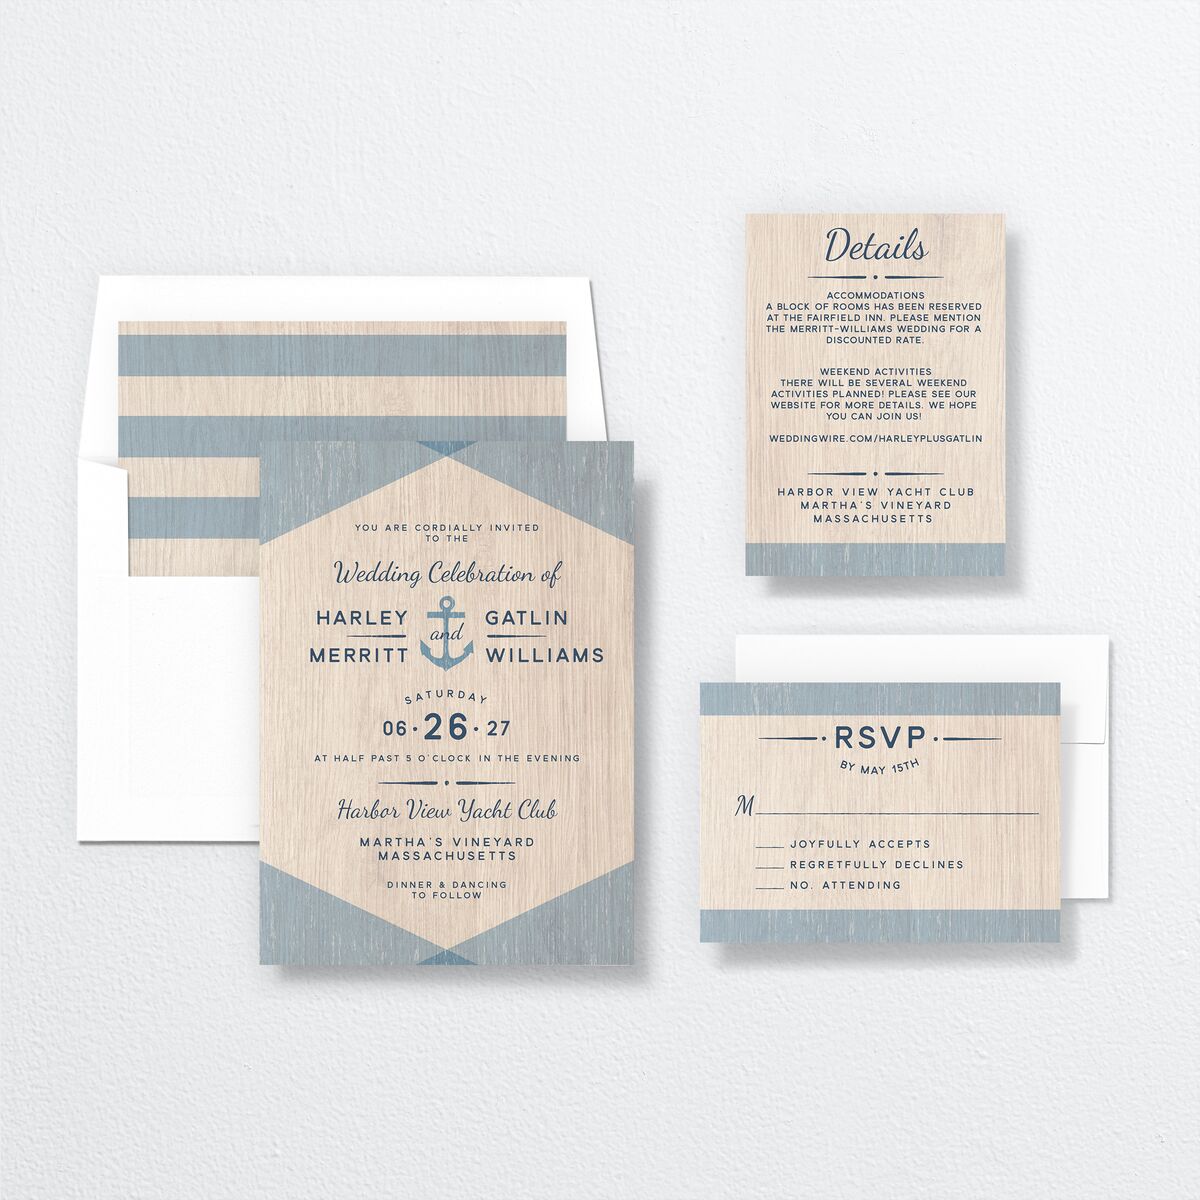 Rustic Seaside Wedding Invitations suite in French Blue